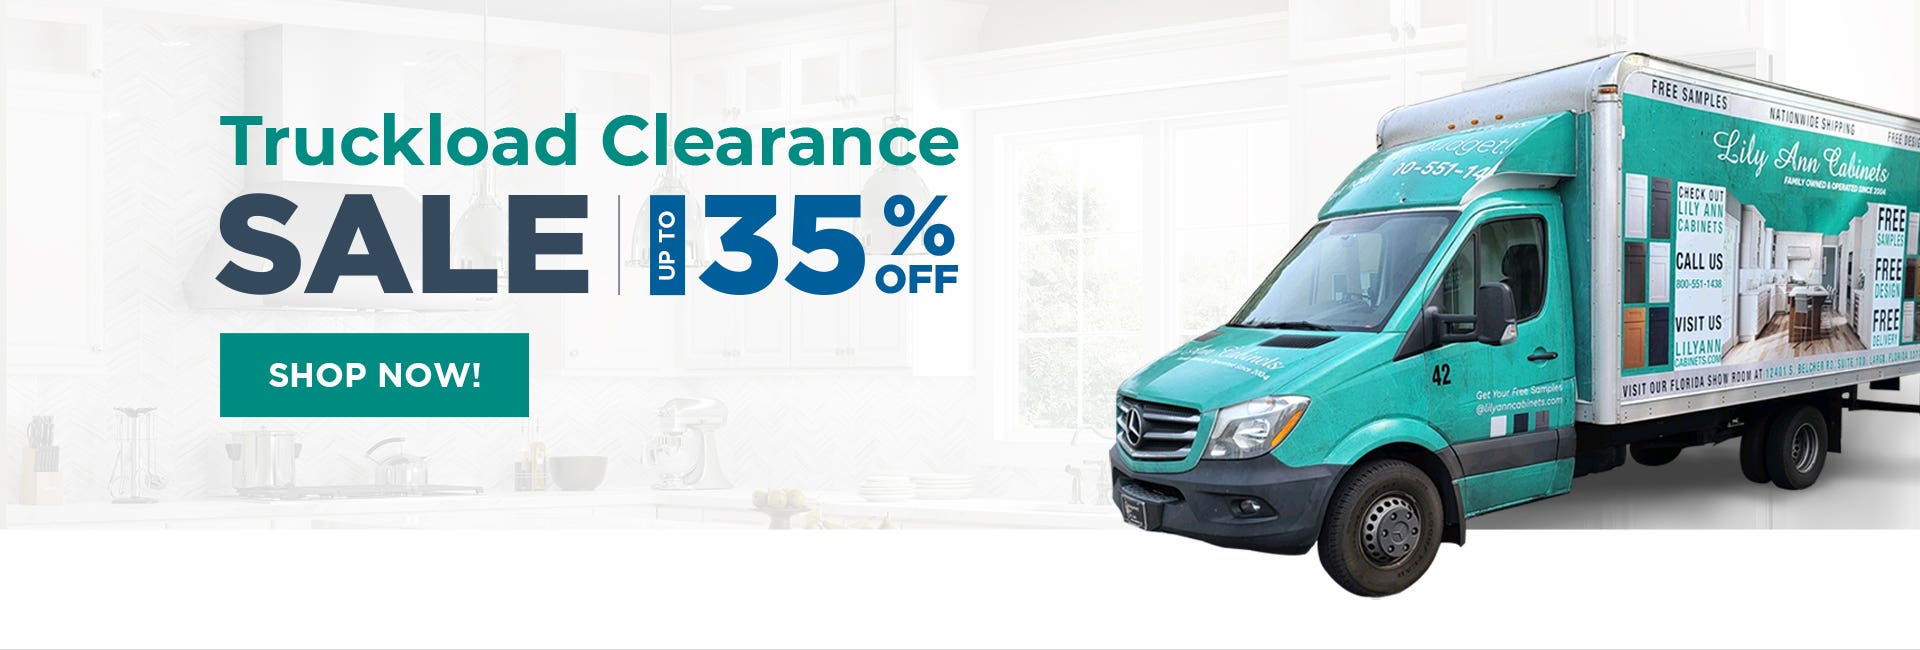 Truckload Clearance Sale